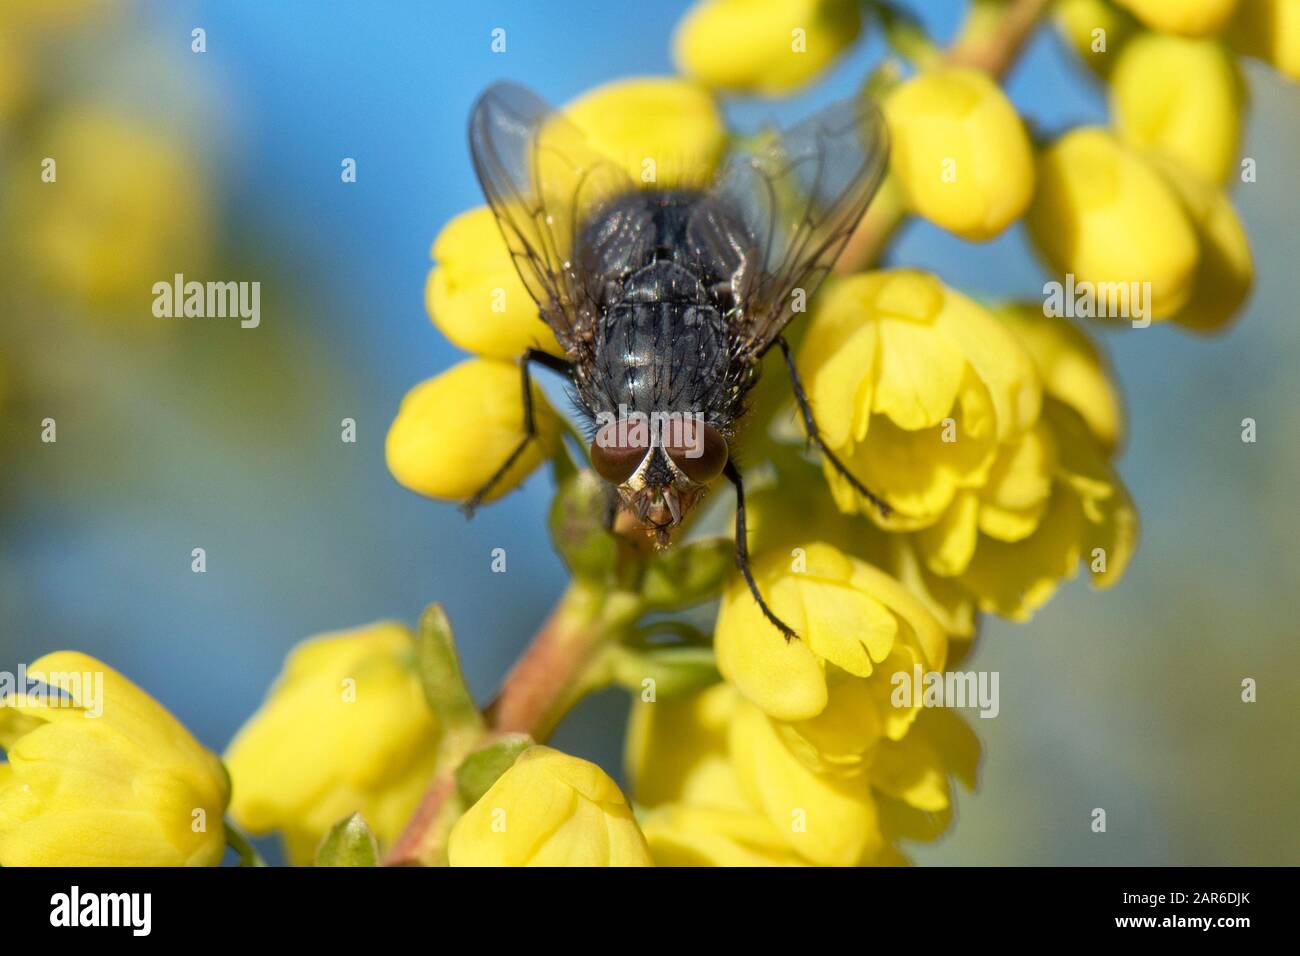 A Muscidae fly (Polietes lardaria), possibly, visiting a yellow flowering Mahonia shrub on a fine Christmas day in mid winte, December, Stock Photo